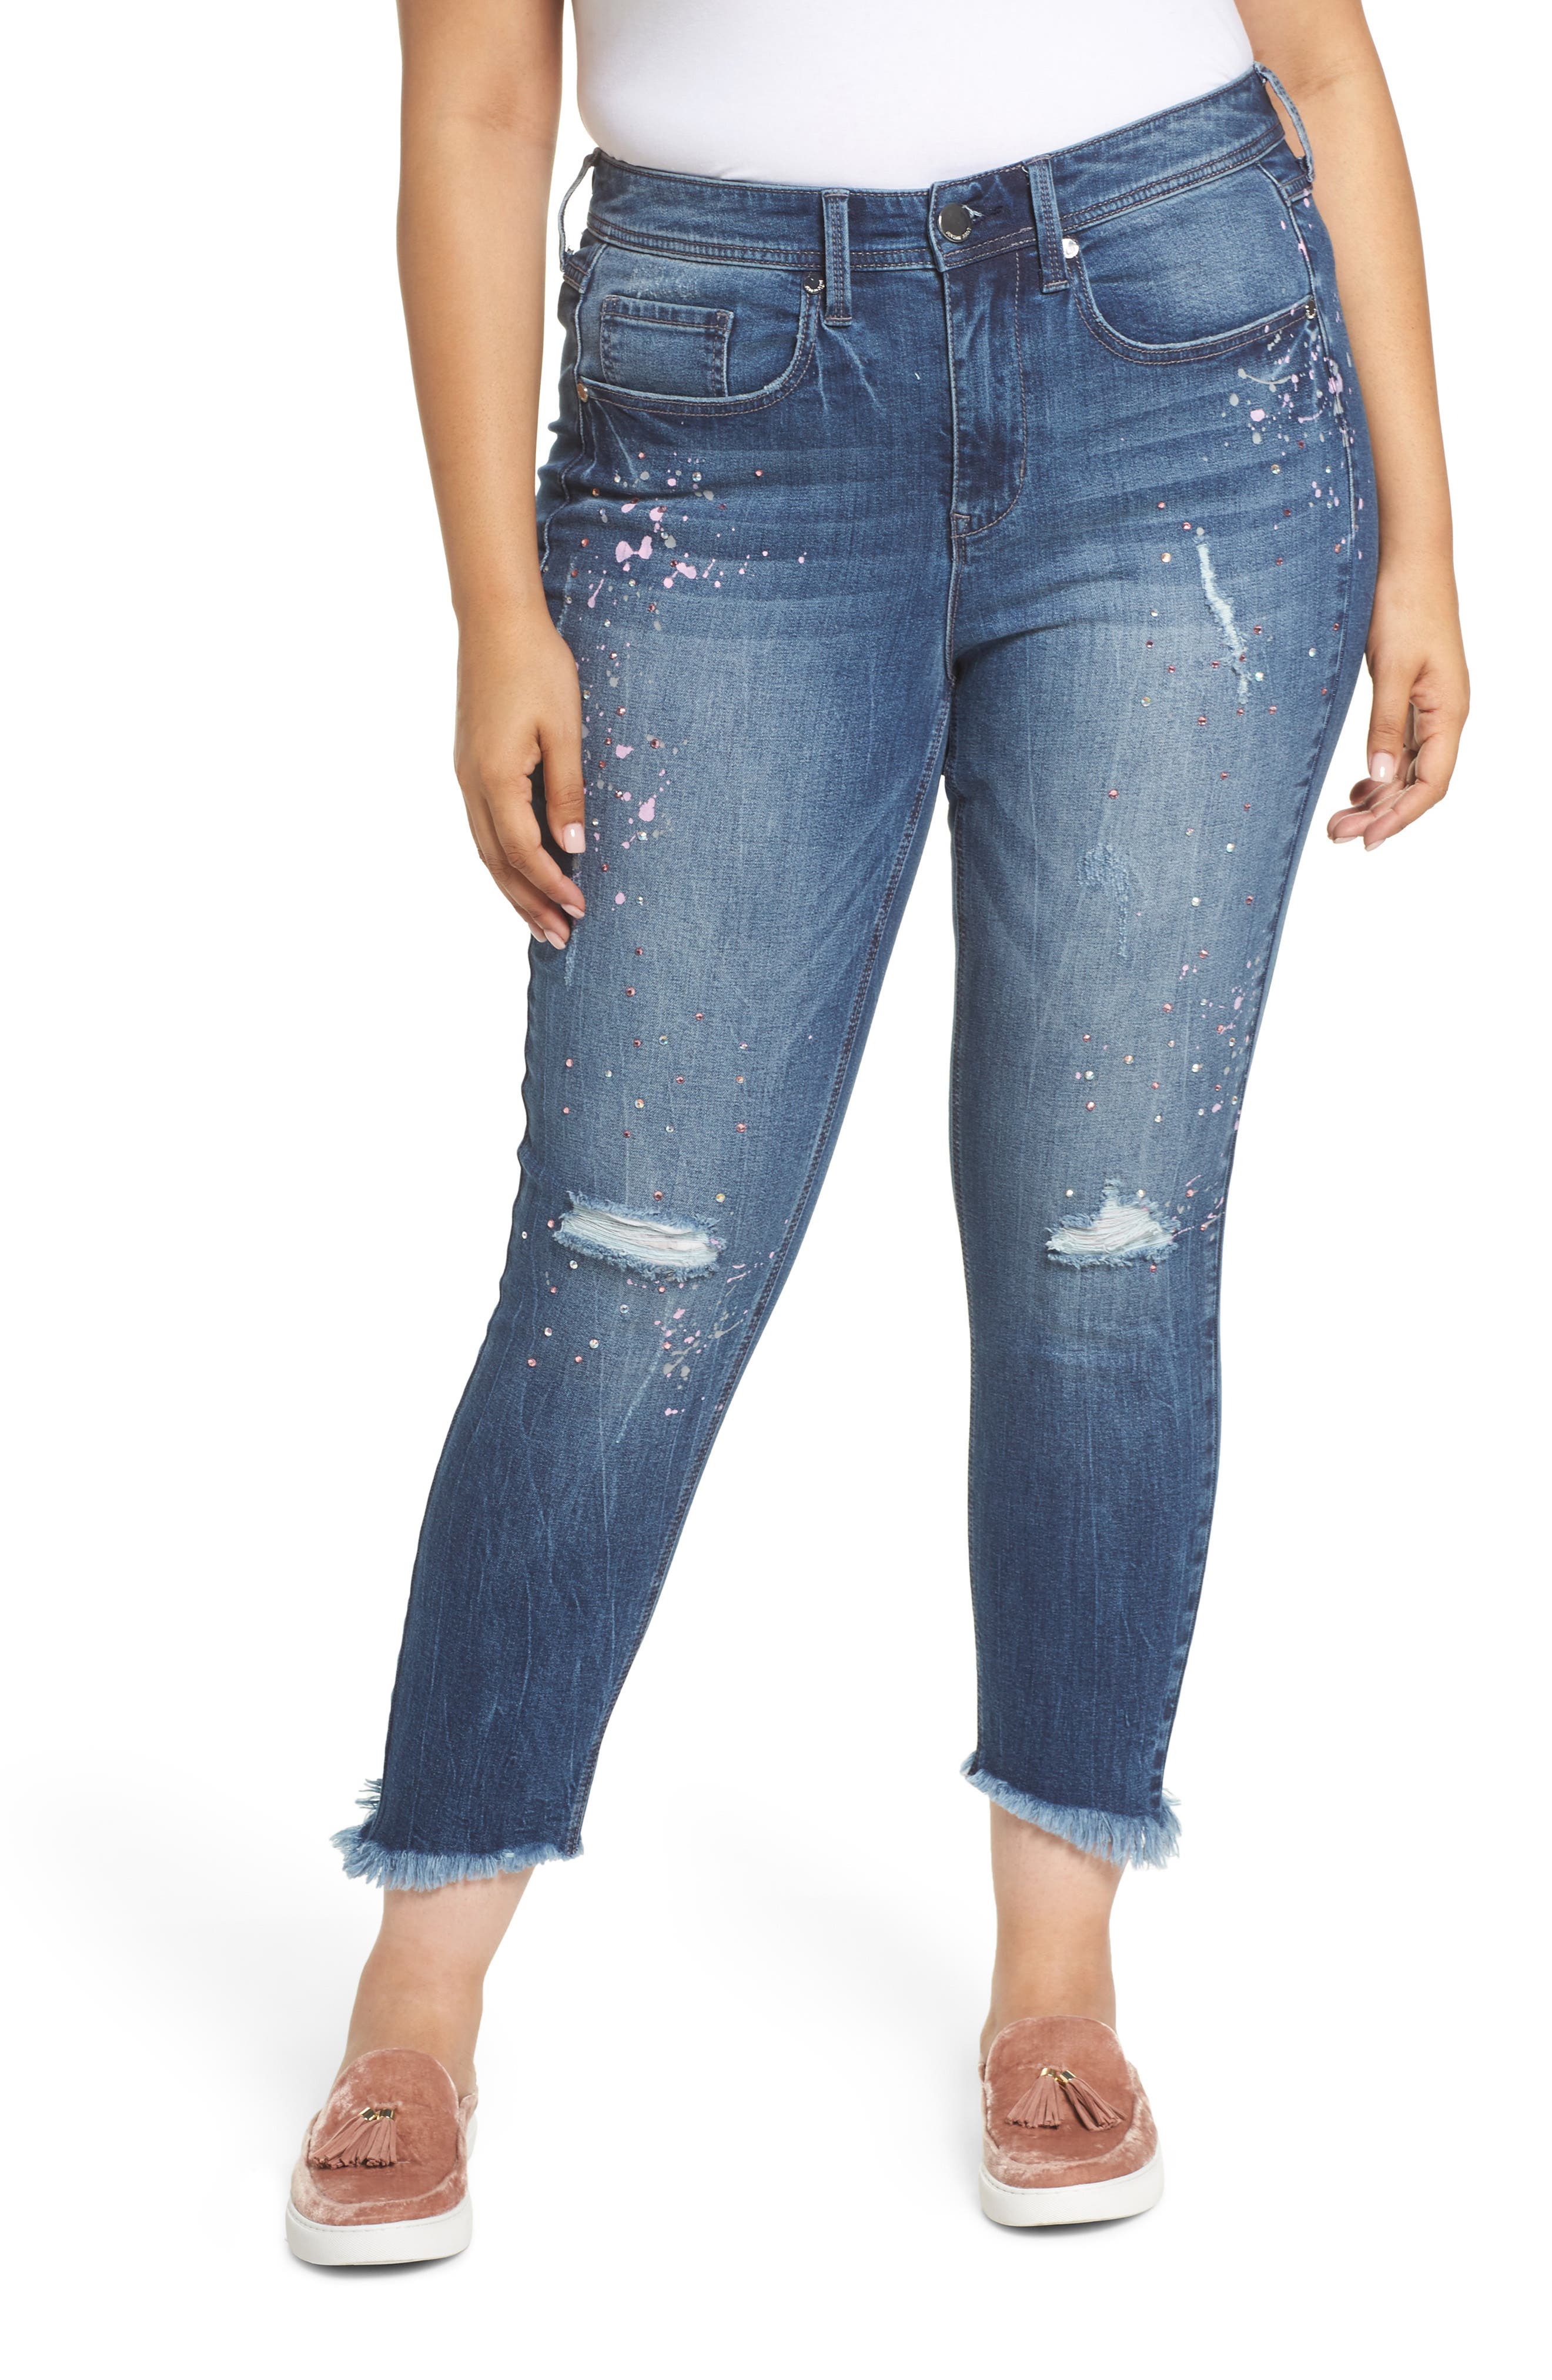 jeans with shredded ankles